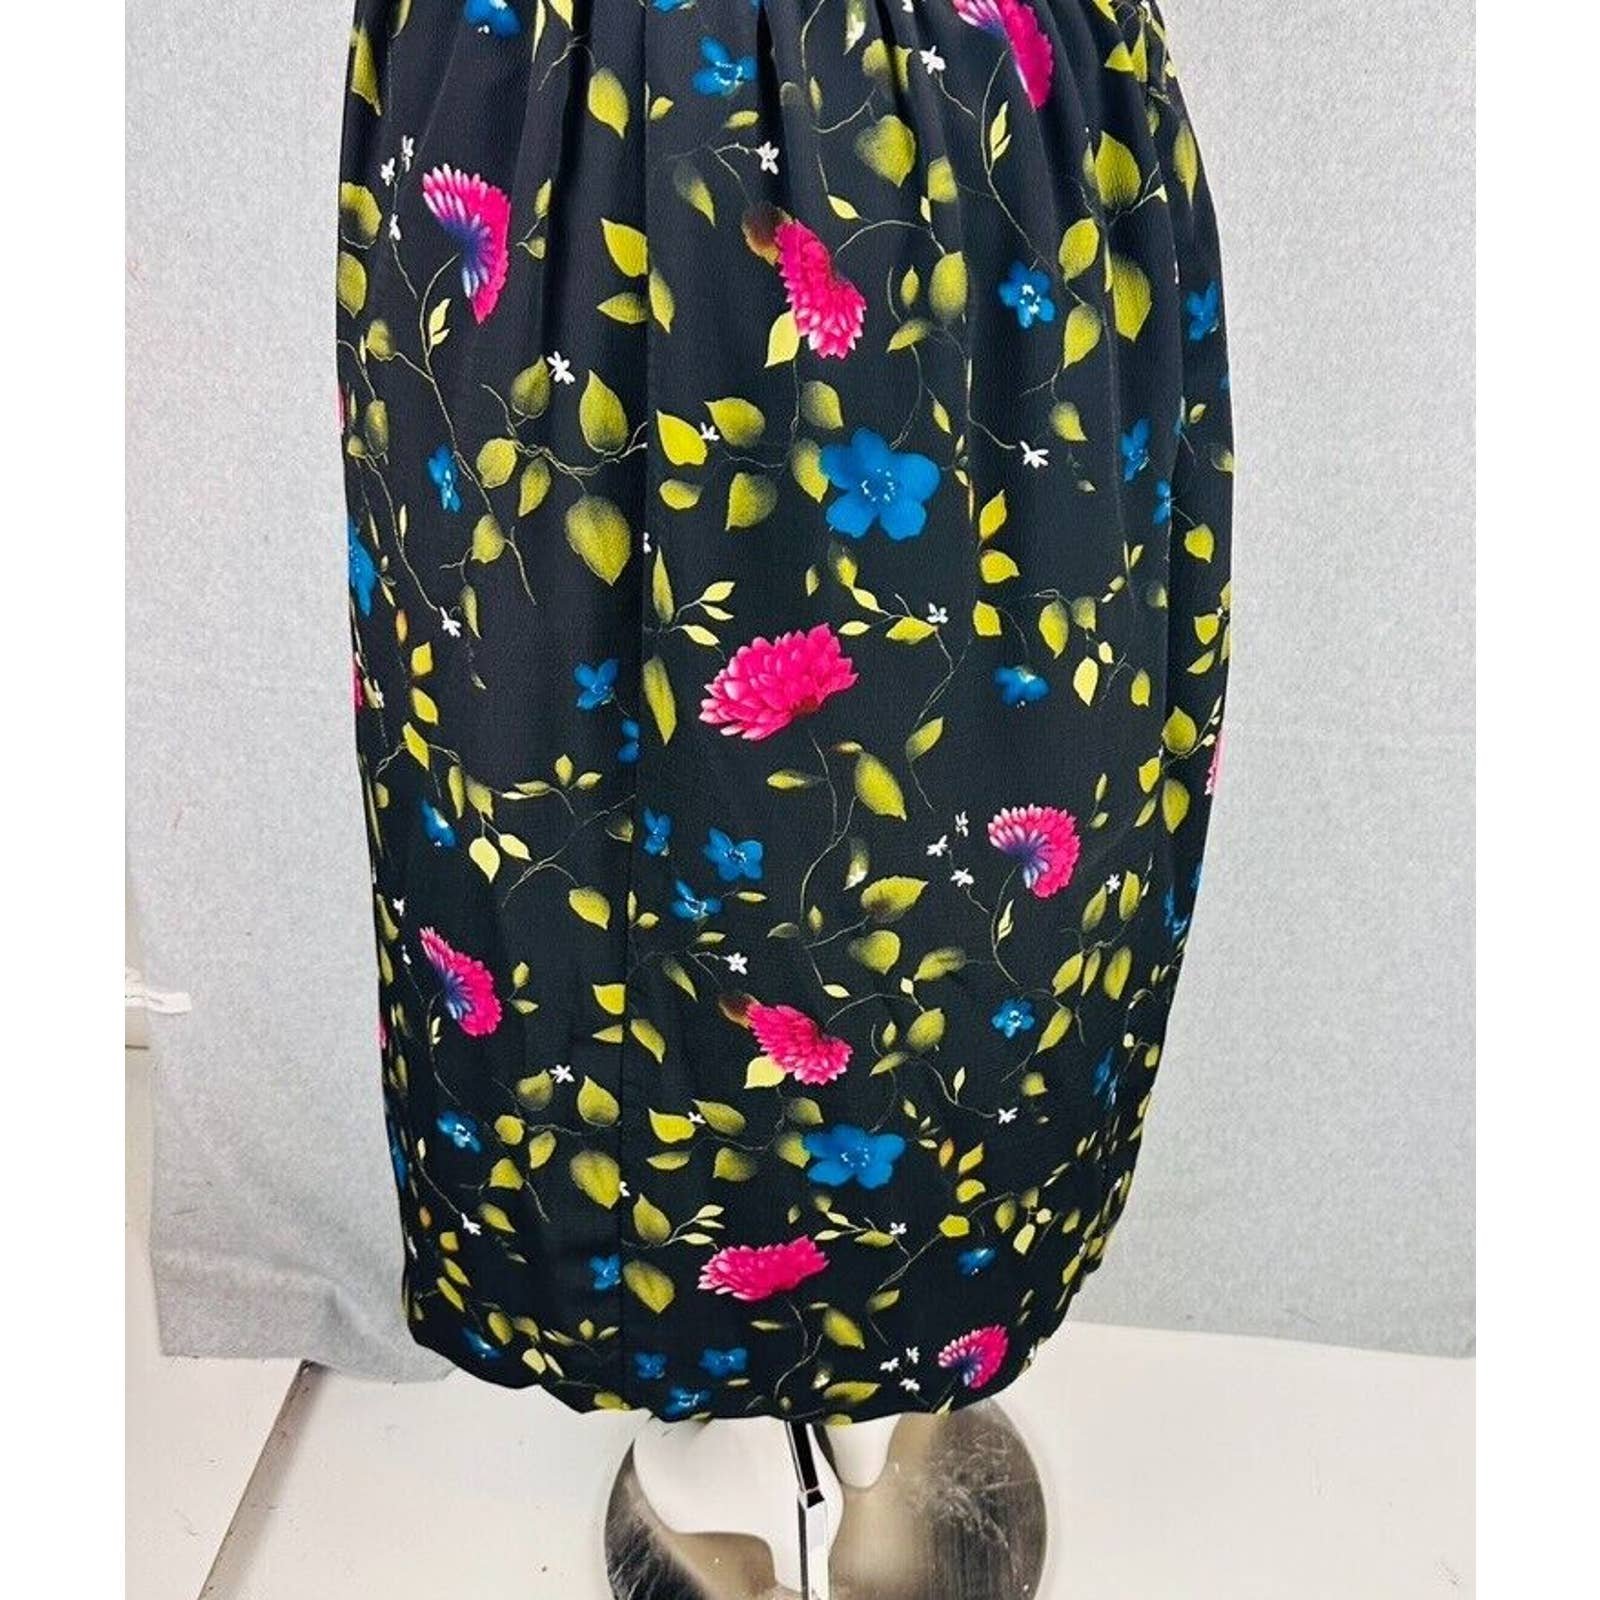 where to buy  Modern Womans Womans Sz 18W Black Floral Skirt Pockets Vintage Pleated PbW5vETN8 Fashion